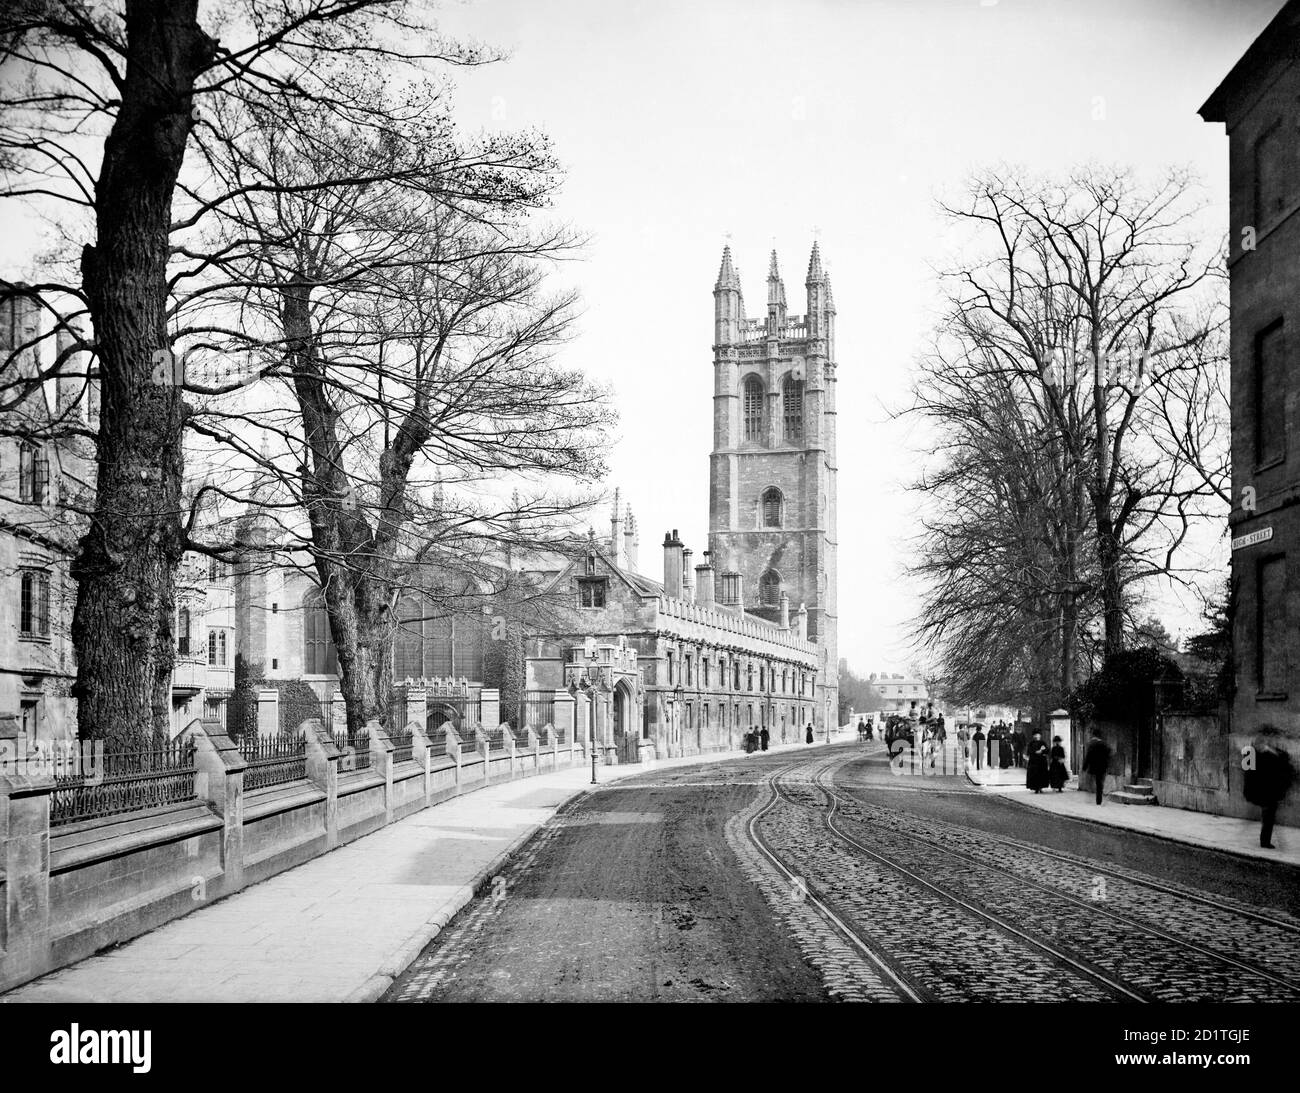 MAGDALEN COLLEGE, Oxford, Oxfordshire. A street view looking along the High Street towards the 144 foot high bell tower of Magdalen College. It is from this tower that the College choir sing on May Day morning in a ceremony that dates back centuries. Photographed by Henry Taunt in 1885. Stock Photo